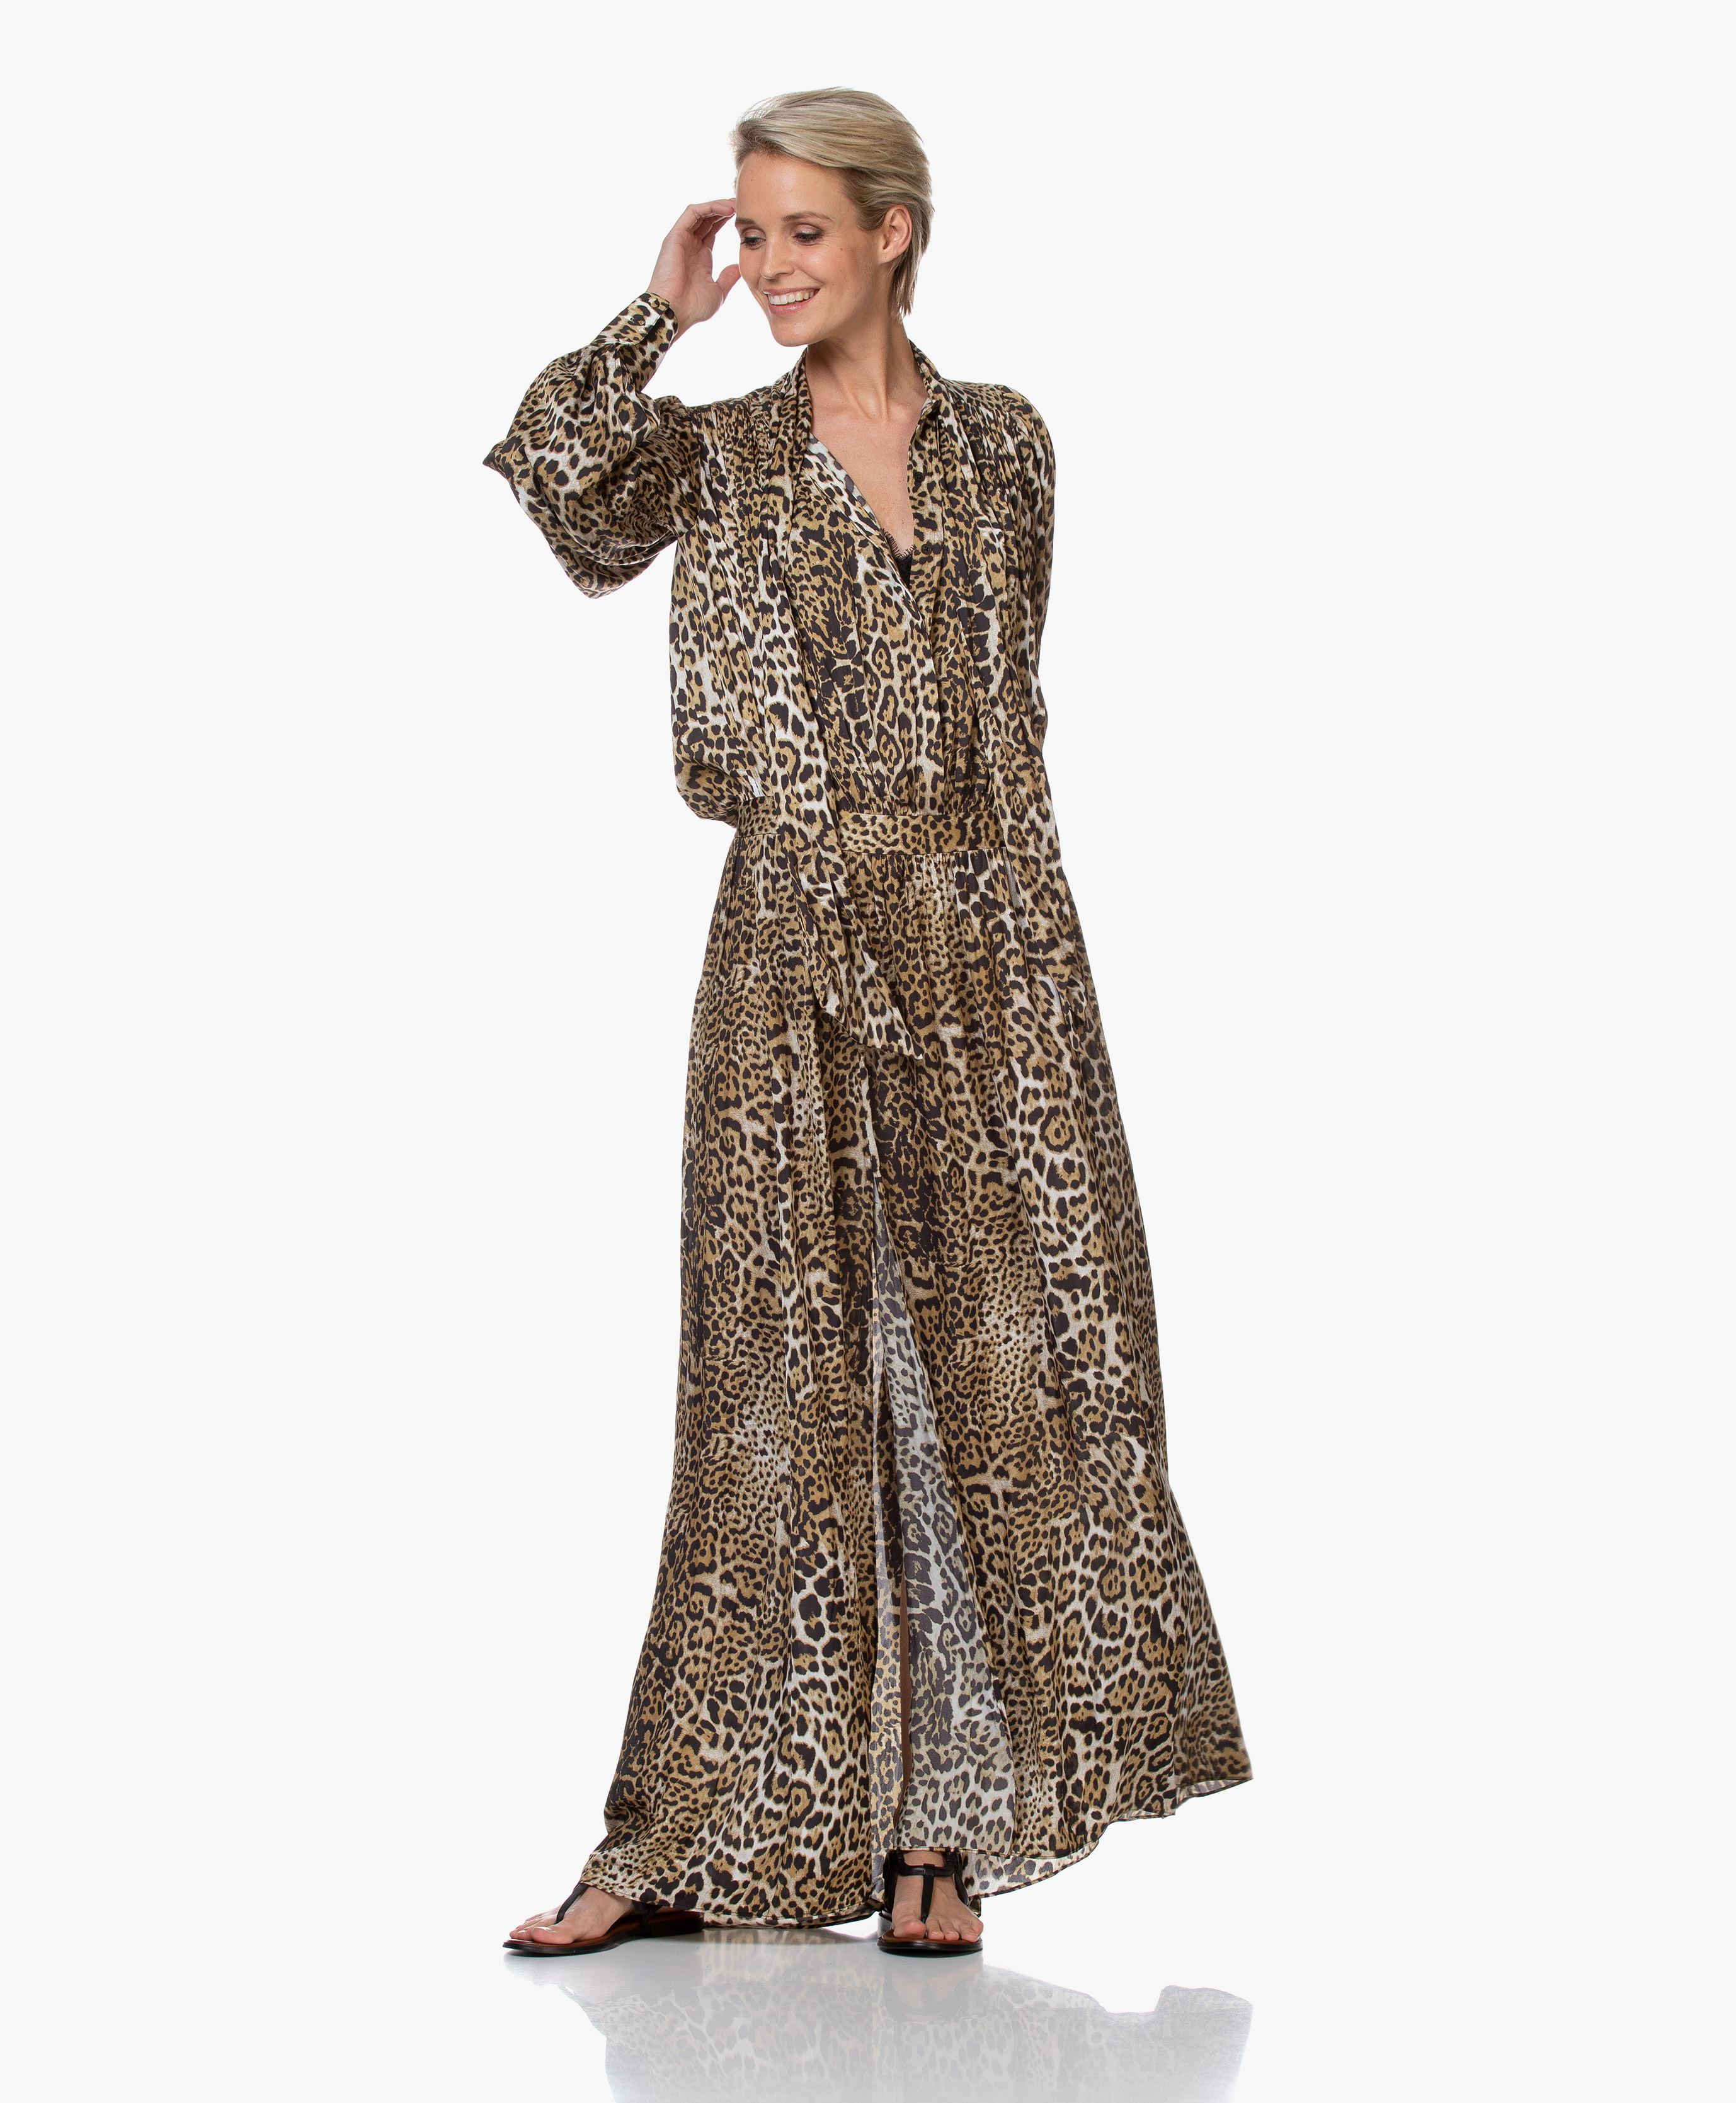 zadig and voltaire leopard dress